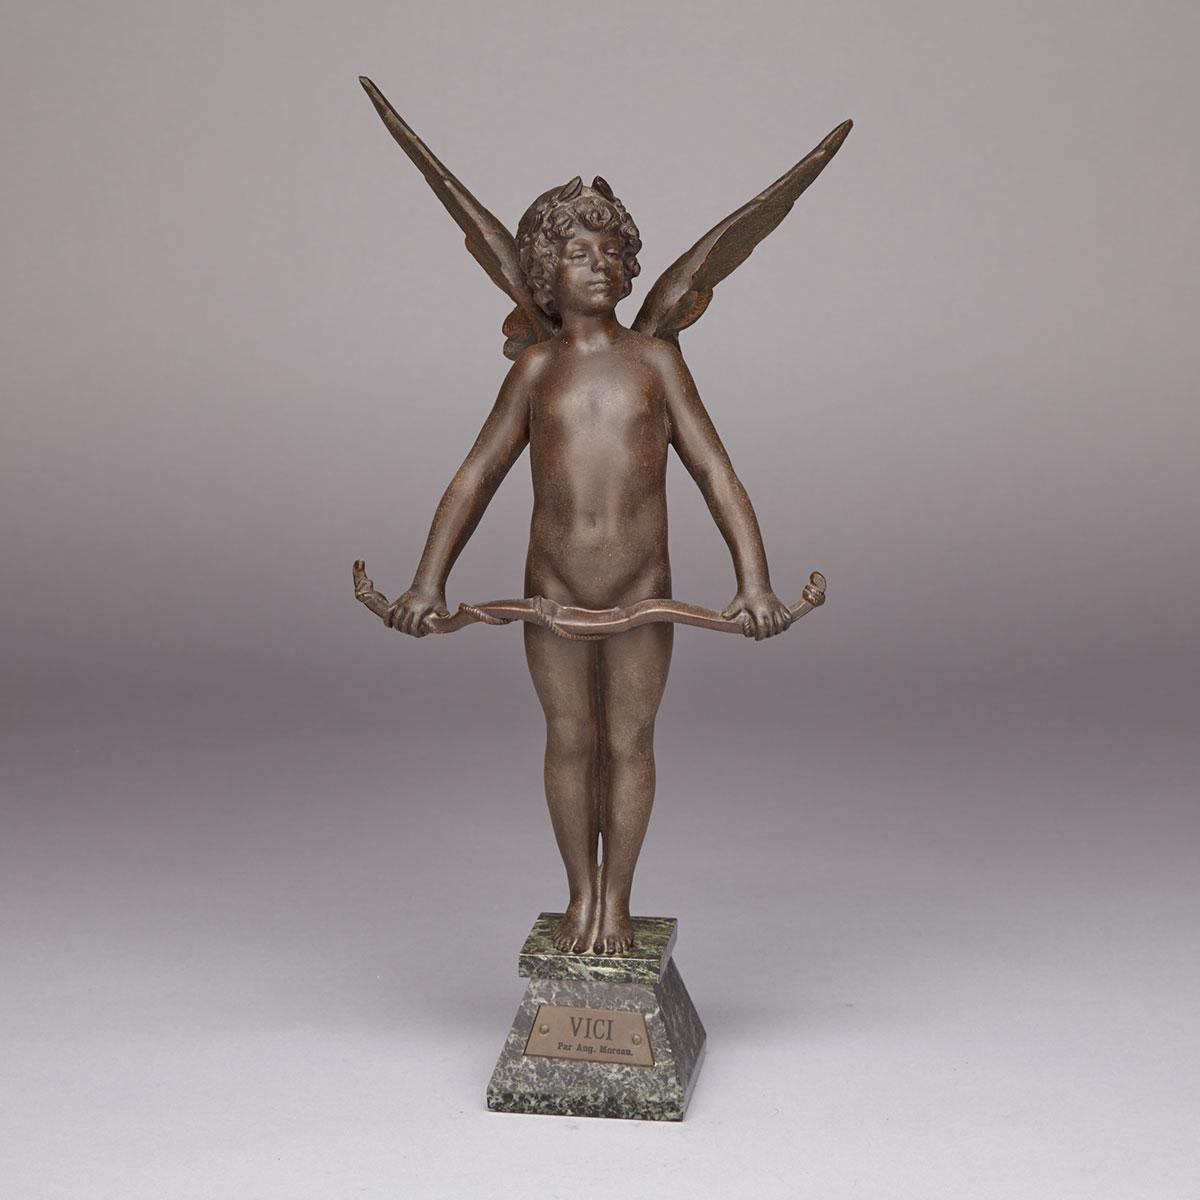 French Patinated Metal Figure of Cupid, ‘Vici’, after Auguste Moreau, 19th century